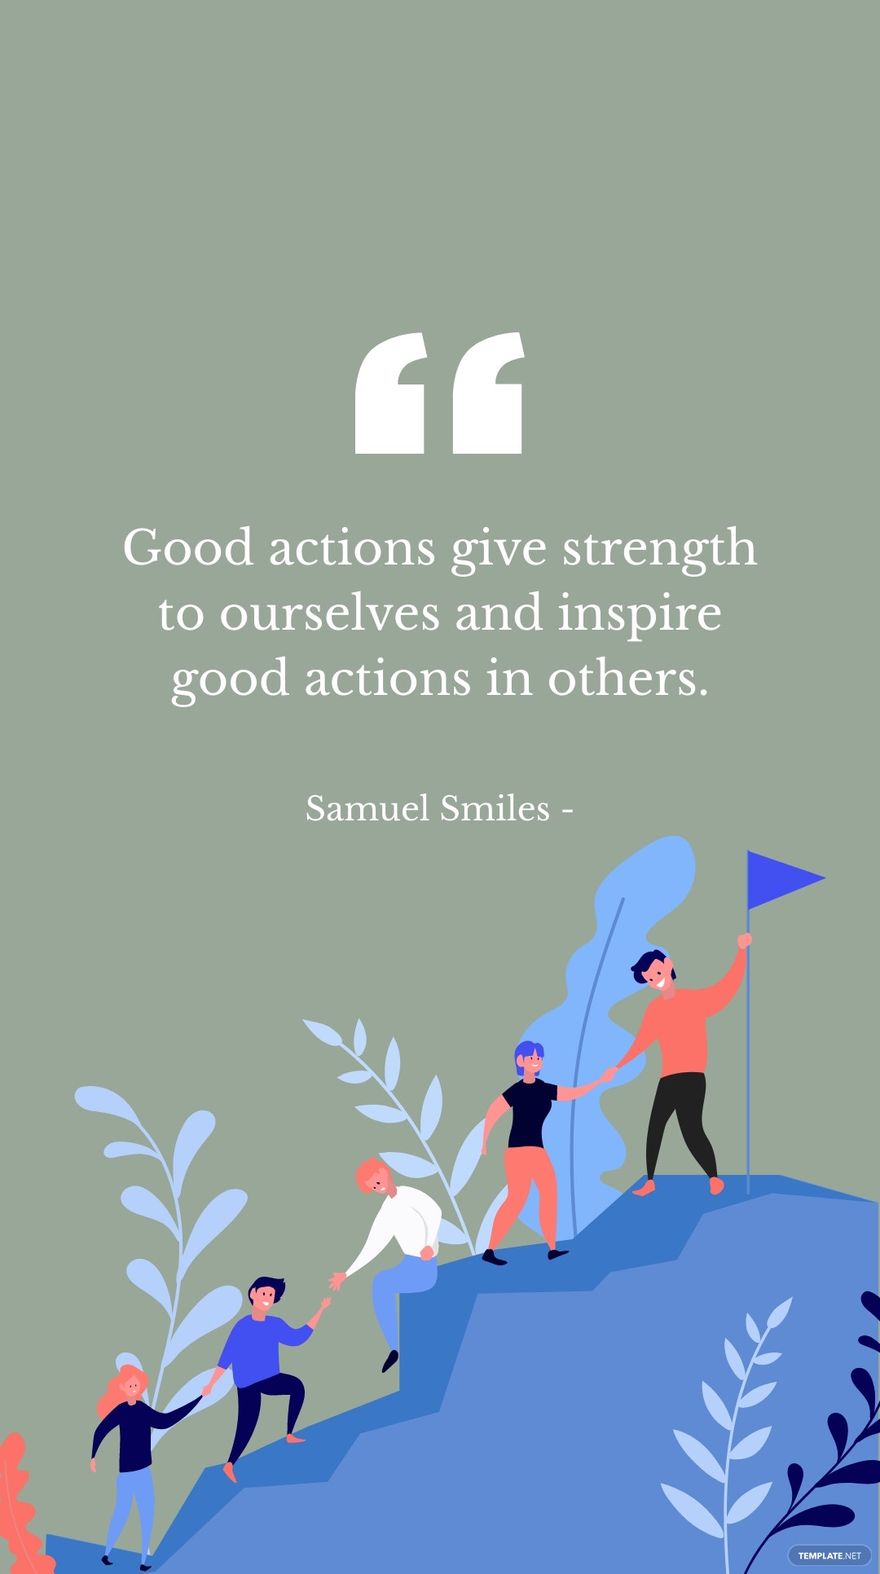 Samuel Smiles - Good actions give strength to ourselves and inspire good actions in others.